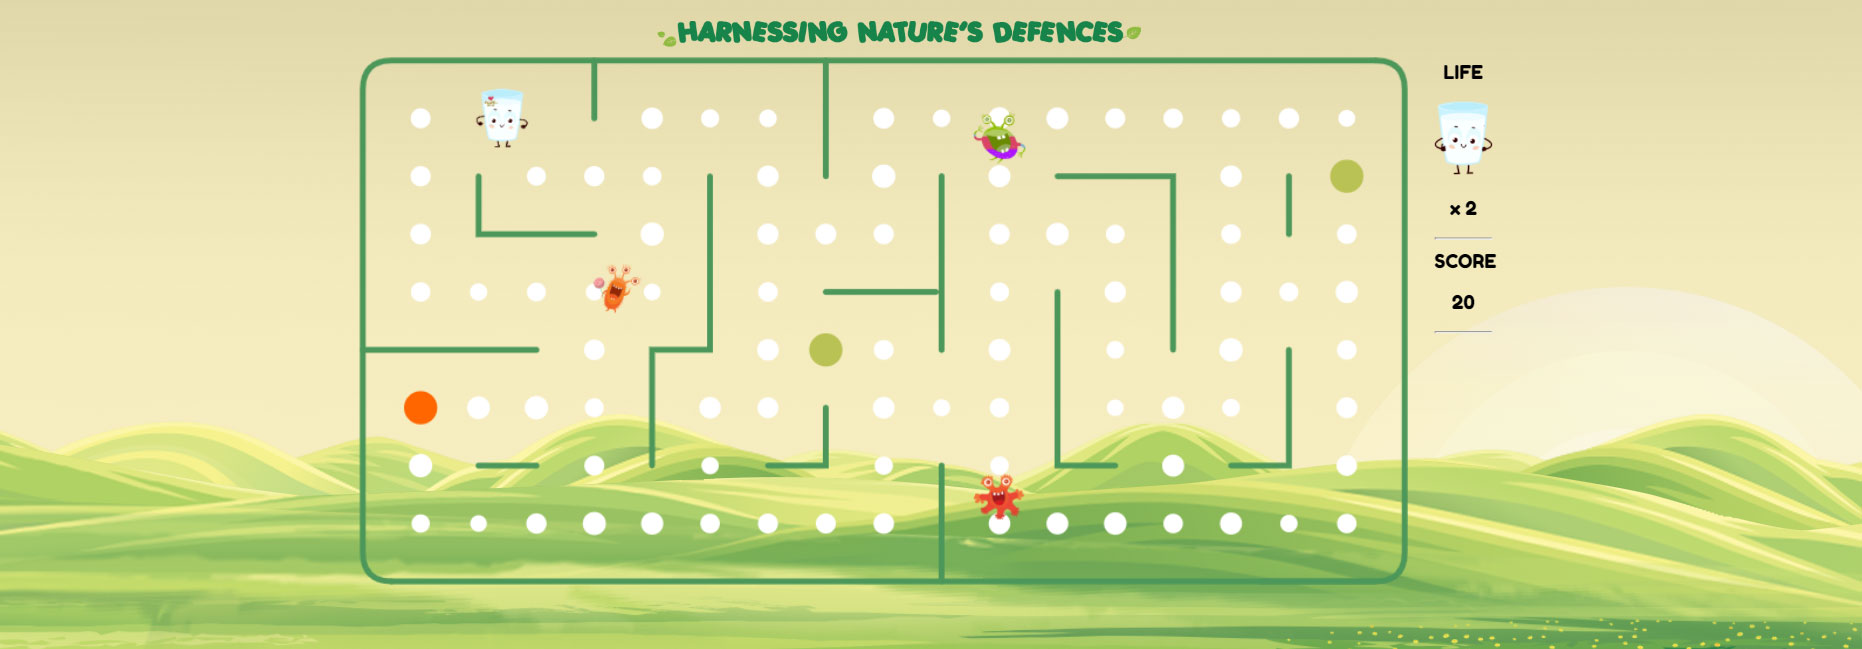 Harnessing Nature's Defences